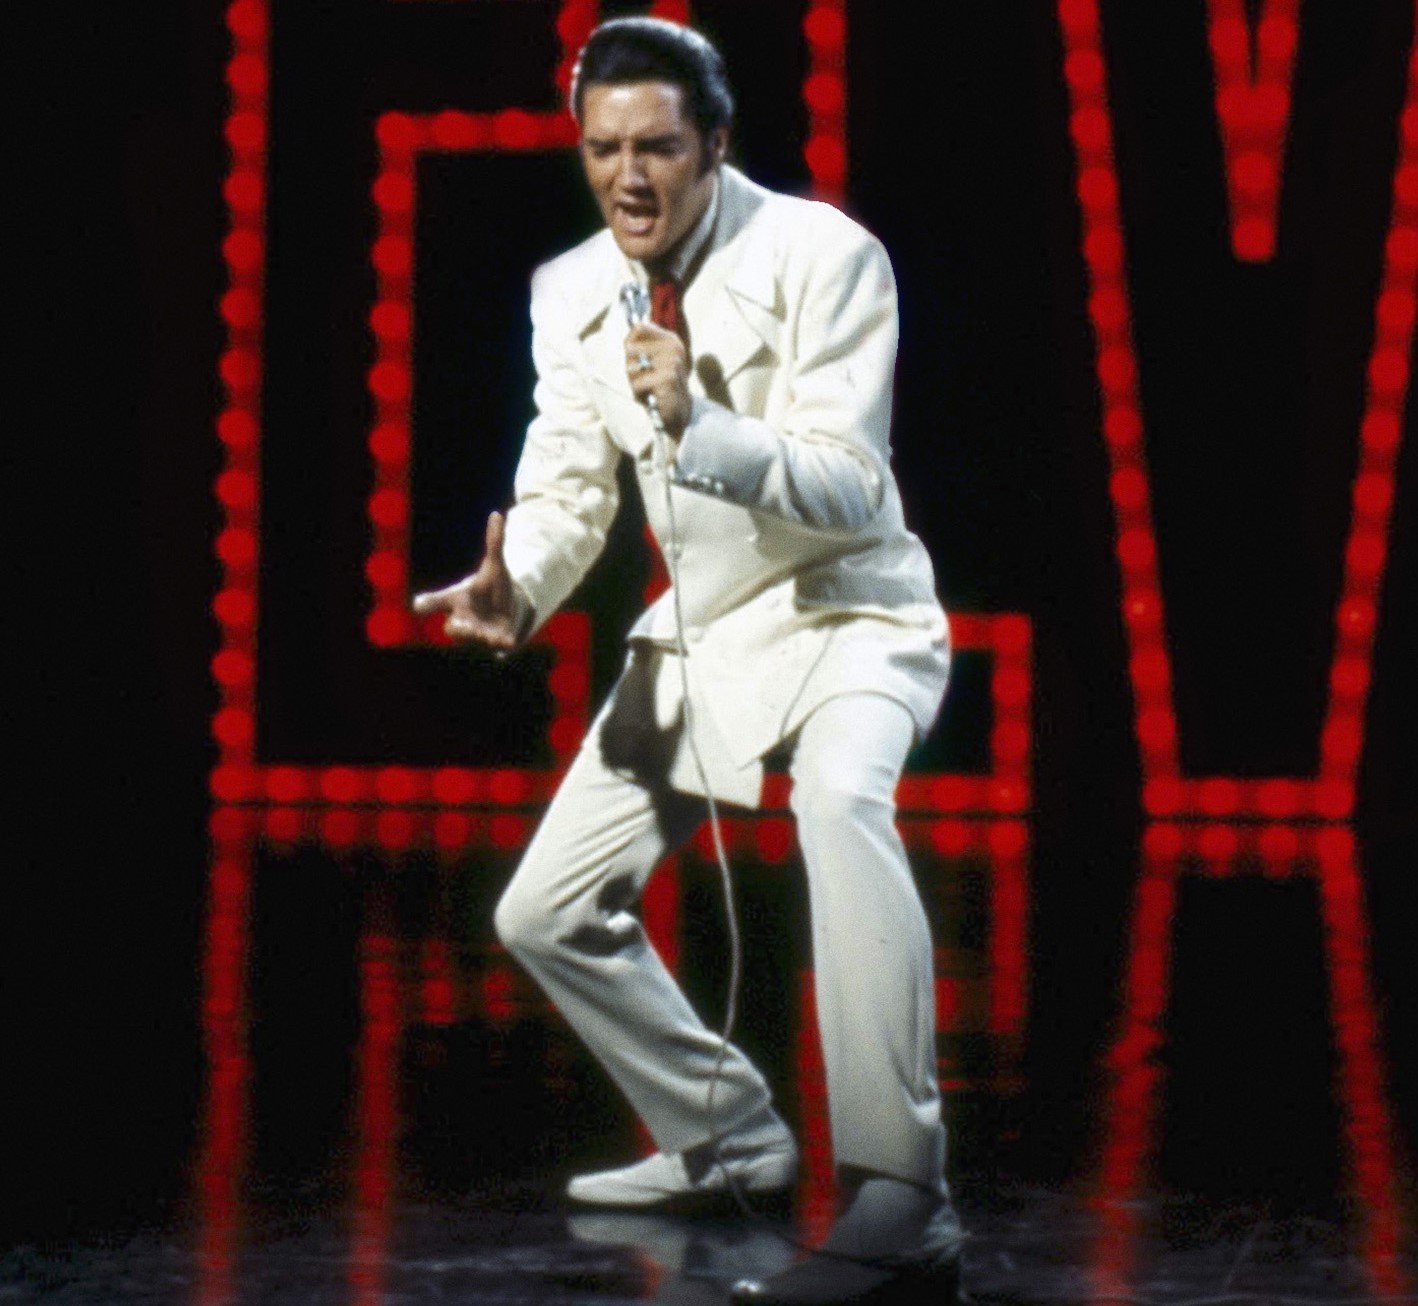 Elvis Presley in a white suit during the '68 Comeback Special'